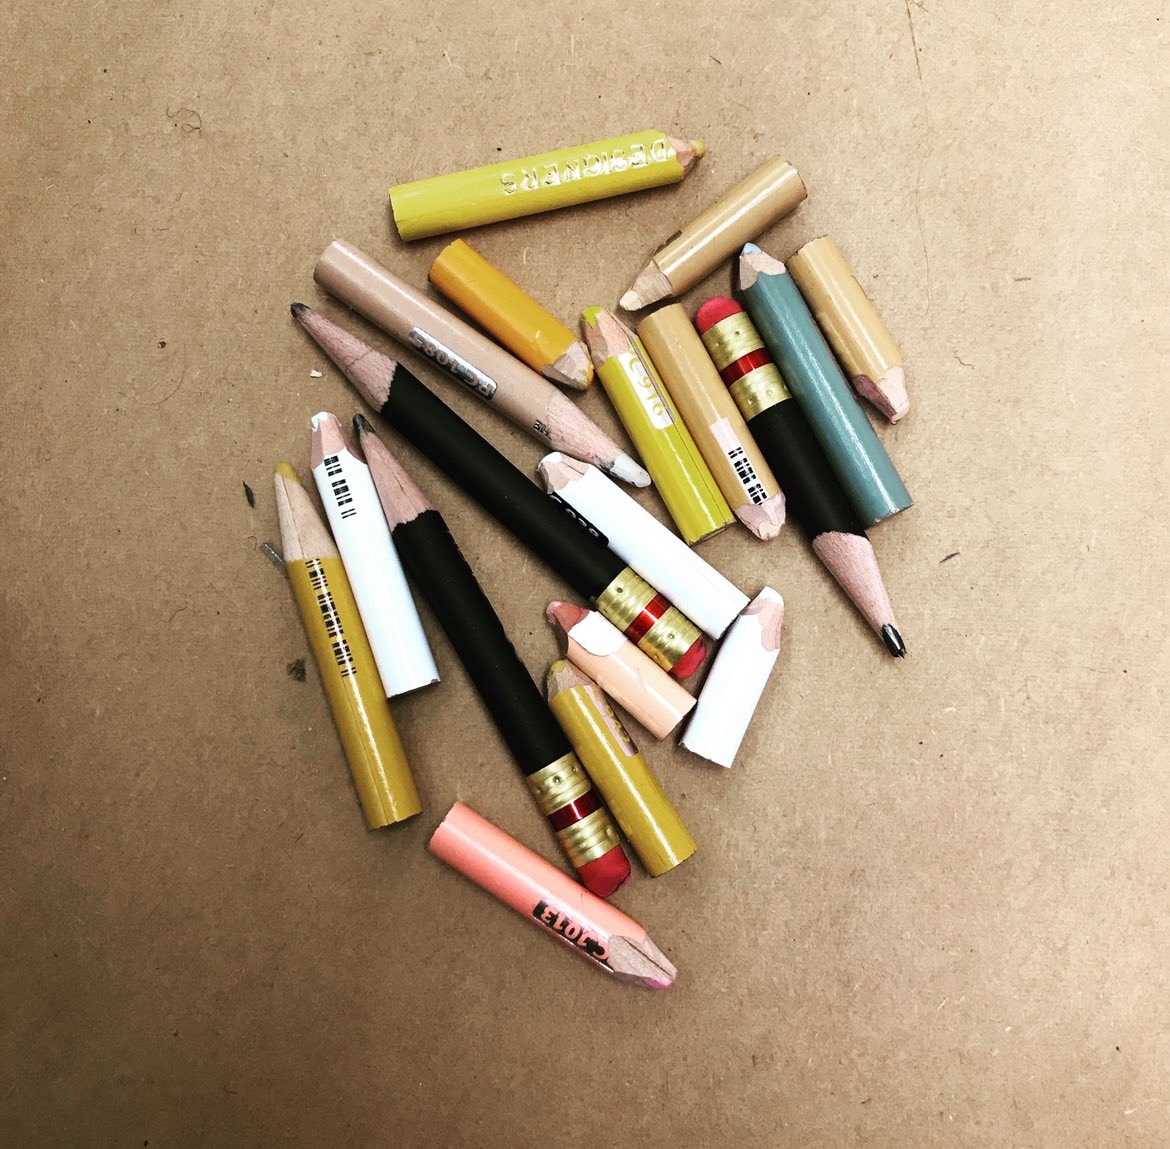 Fun fact of the day bc of a FB memory. If fabric can’t be traced upon by a regular pencil (wrong color, texture, etc) I use Prismacolor colored pencils. (They’re the softest.) 

Flashback to one summer where some metallic netting ate an entire pencil. And my collection of stumps.